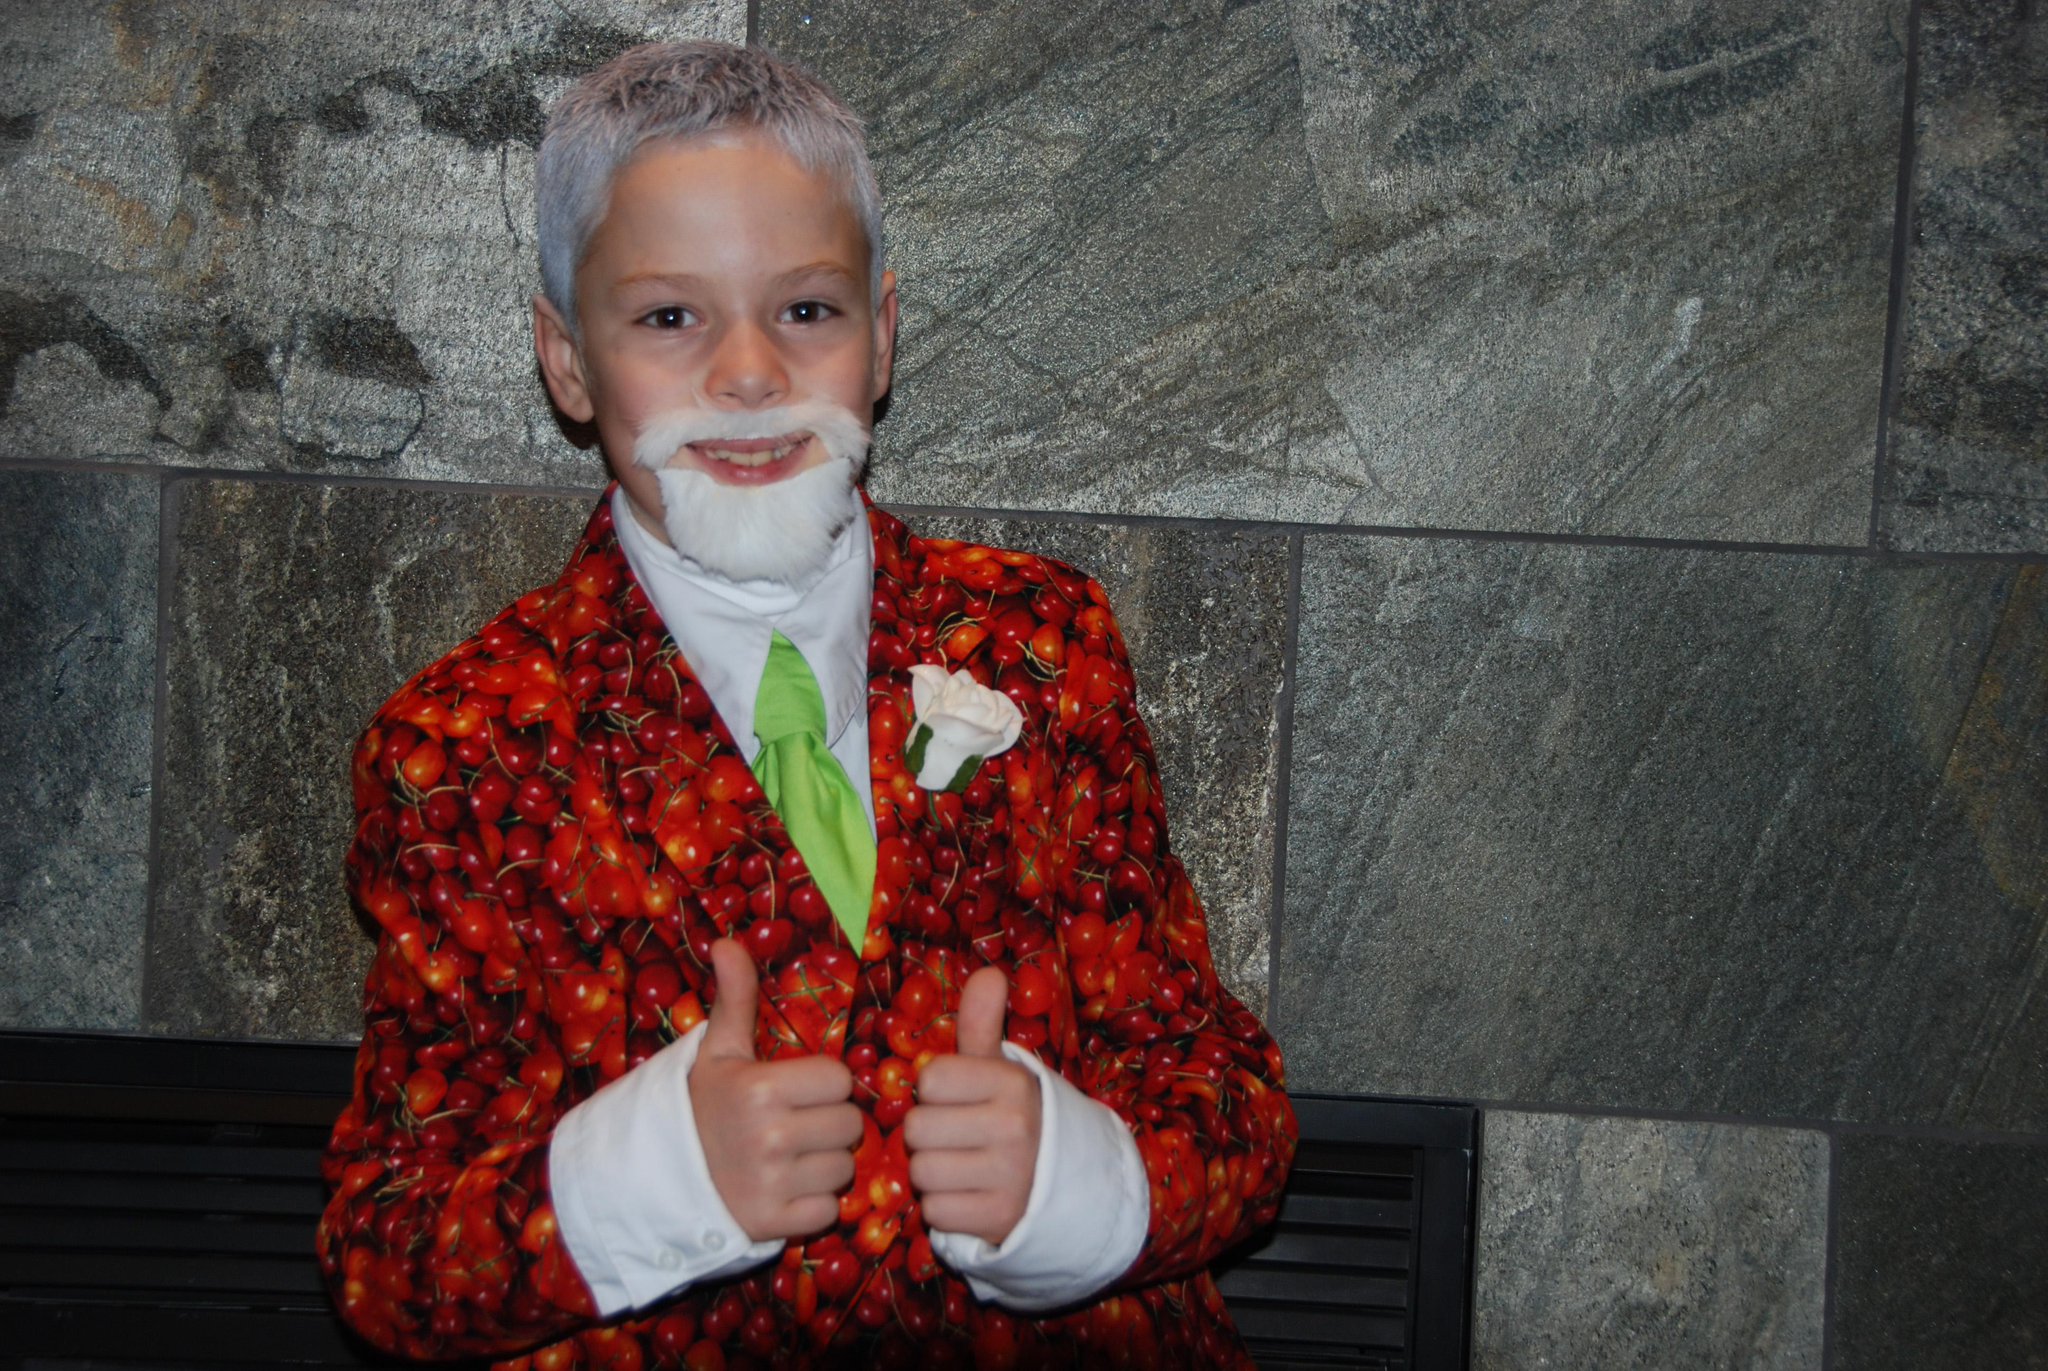 My 11 year old son wants to wish Don Cherry a happy 81st birthday! 